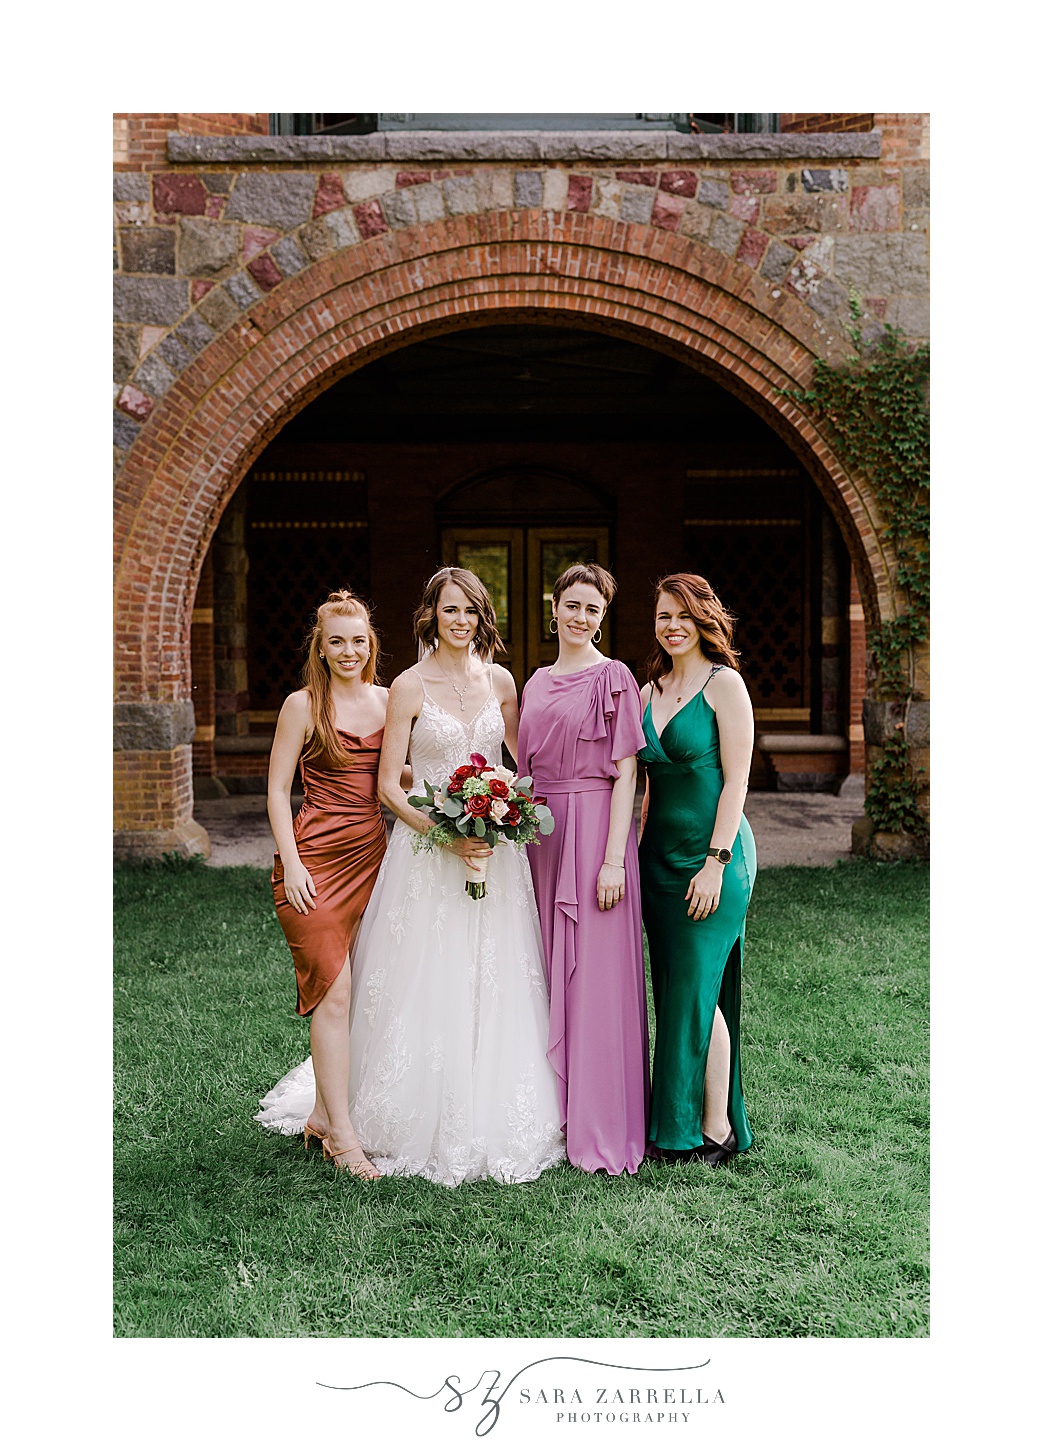 bride poses with bridesmaids in jewel tone gowns